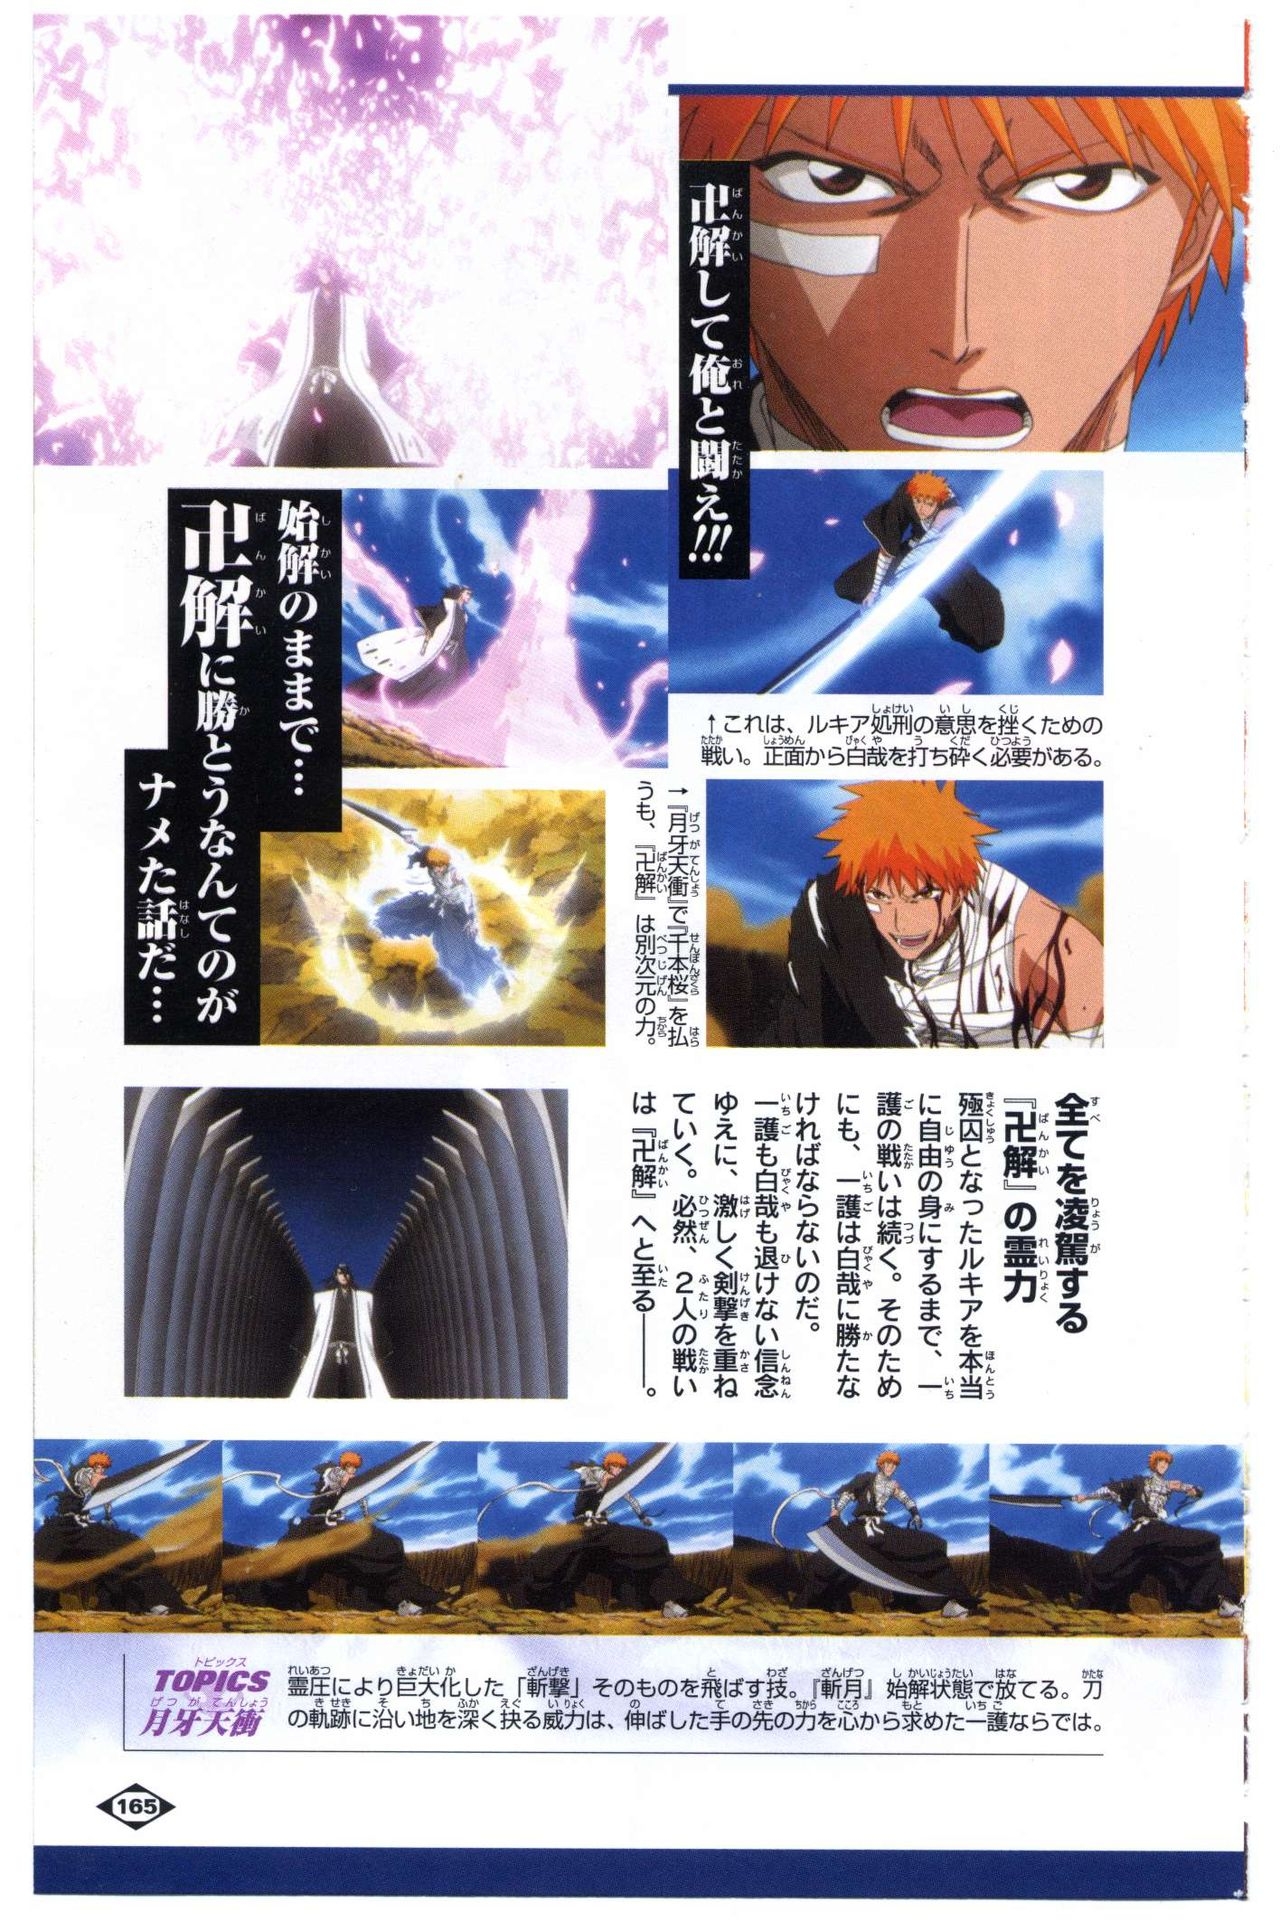 Bleach: Official Animation Book VIBEs 165